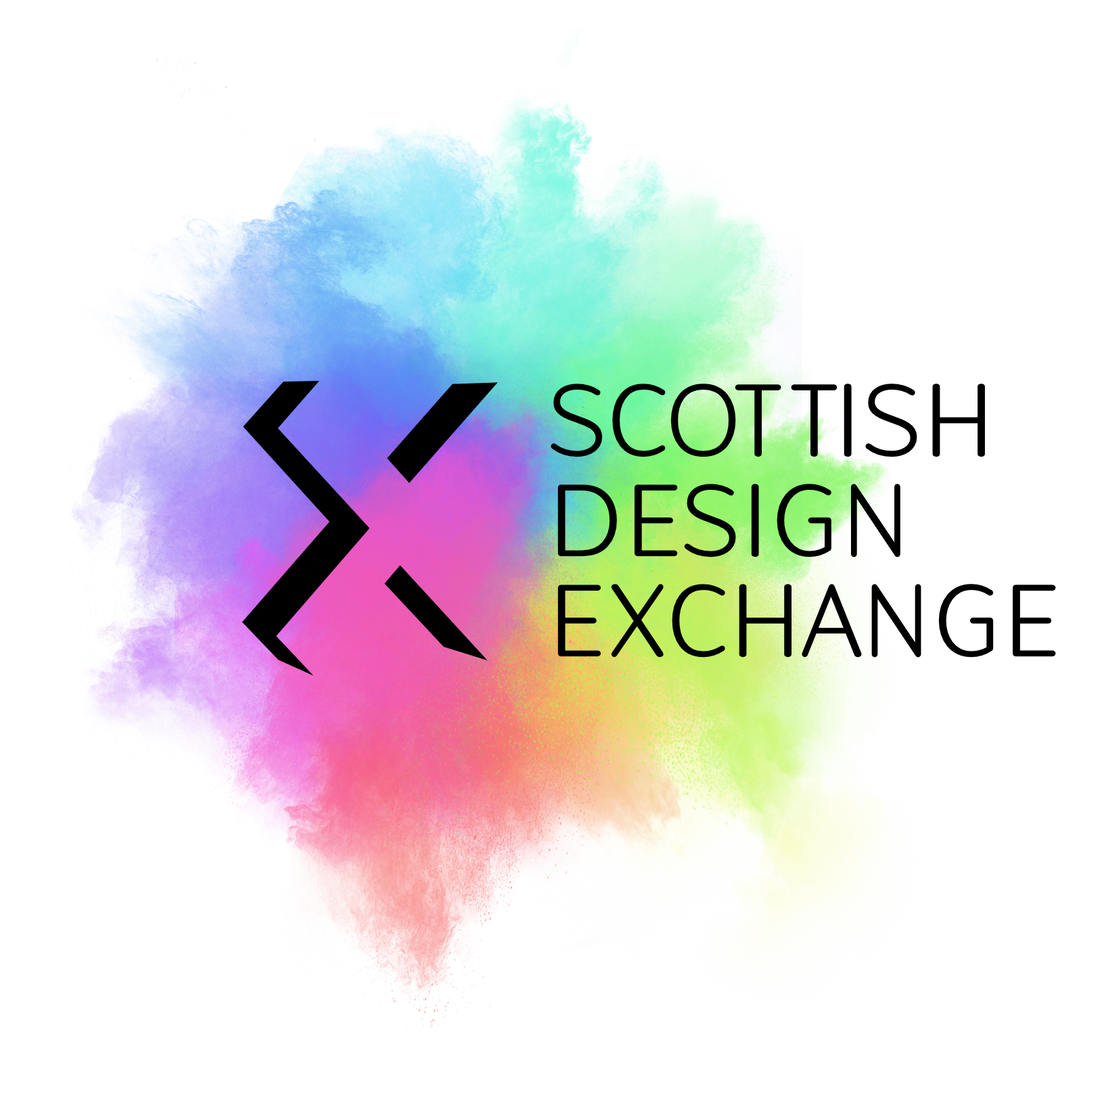 Evelyn McDonald, CEO of Scottish EDGE Awards, discusses SDX and her role as chair of the board.